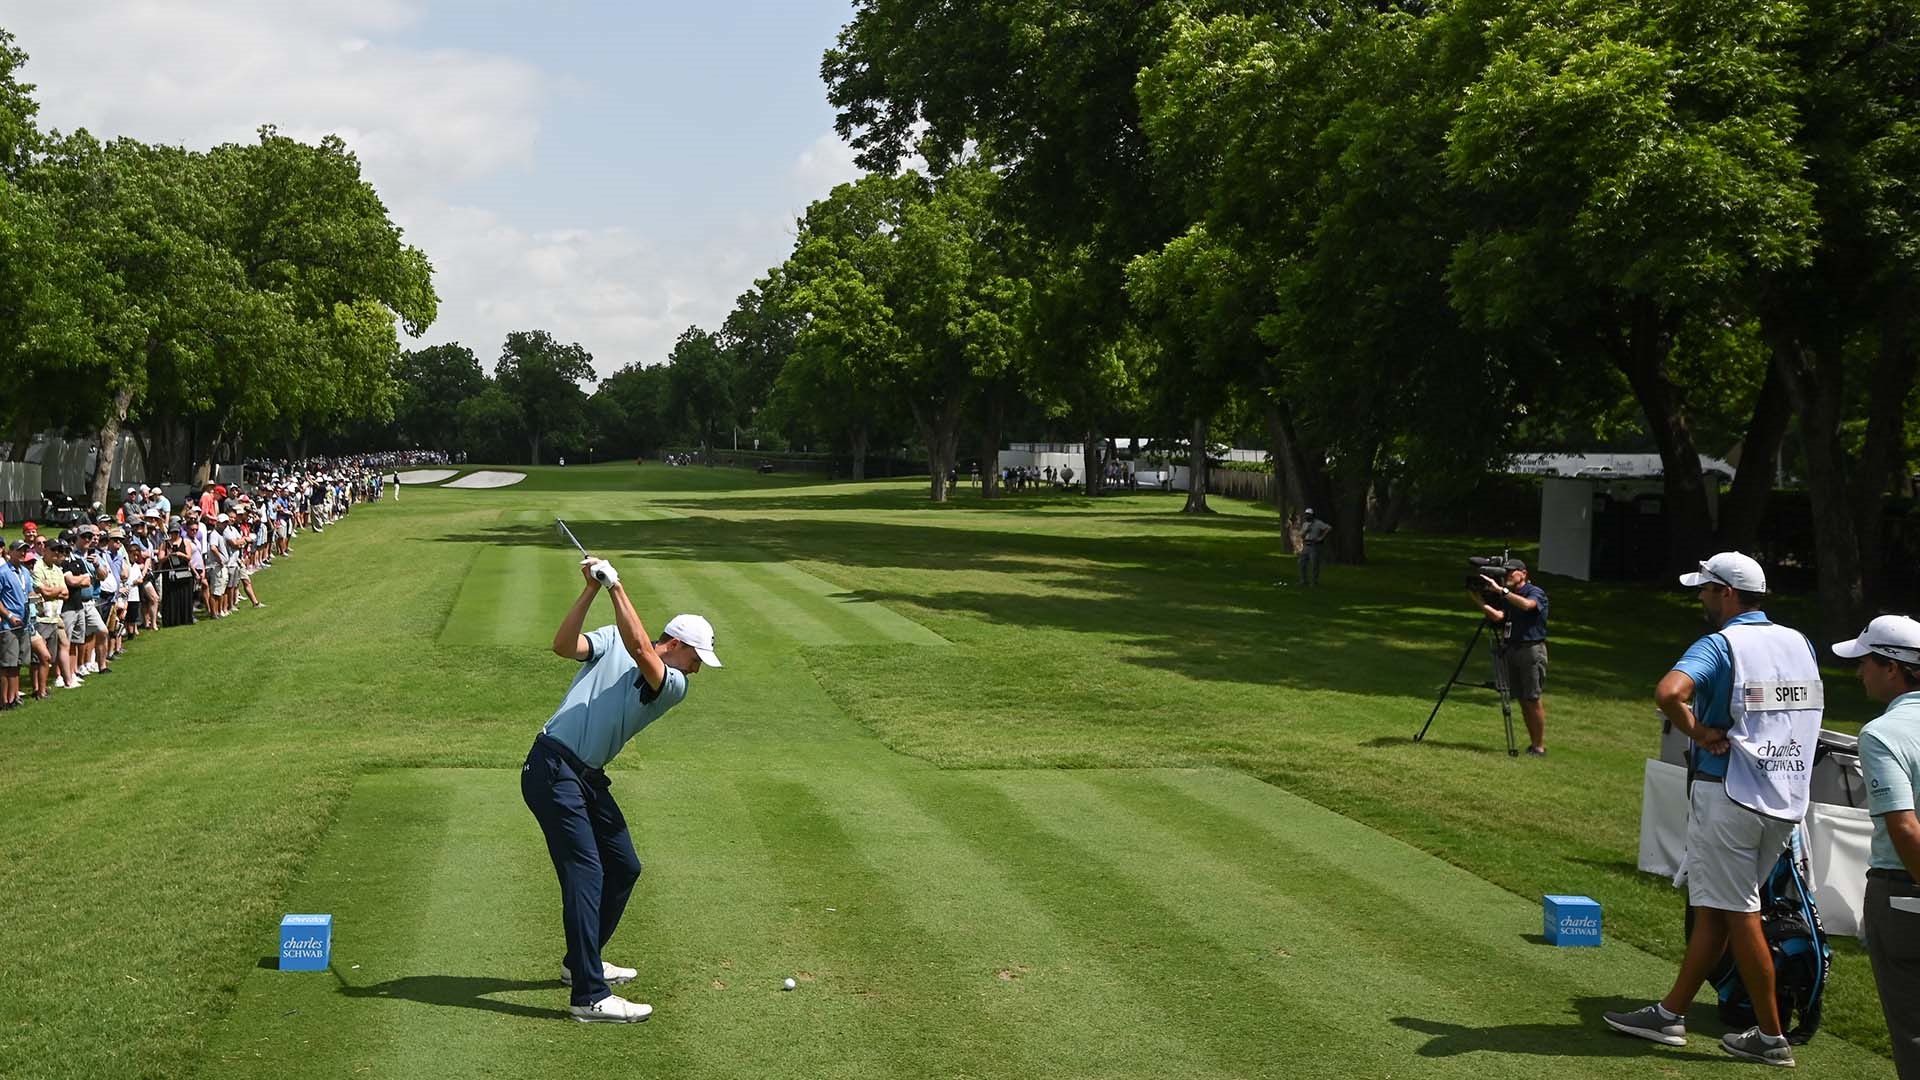 Jordan Spieth tees off during action at the 2019 Charles Schwab Challenge at Colonial Country Club